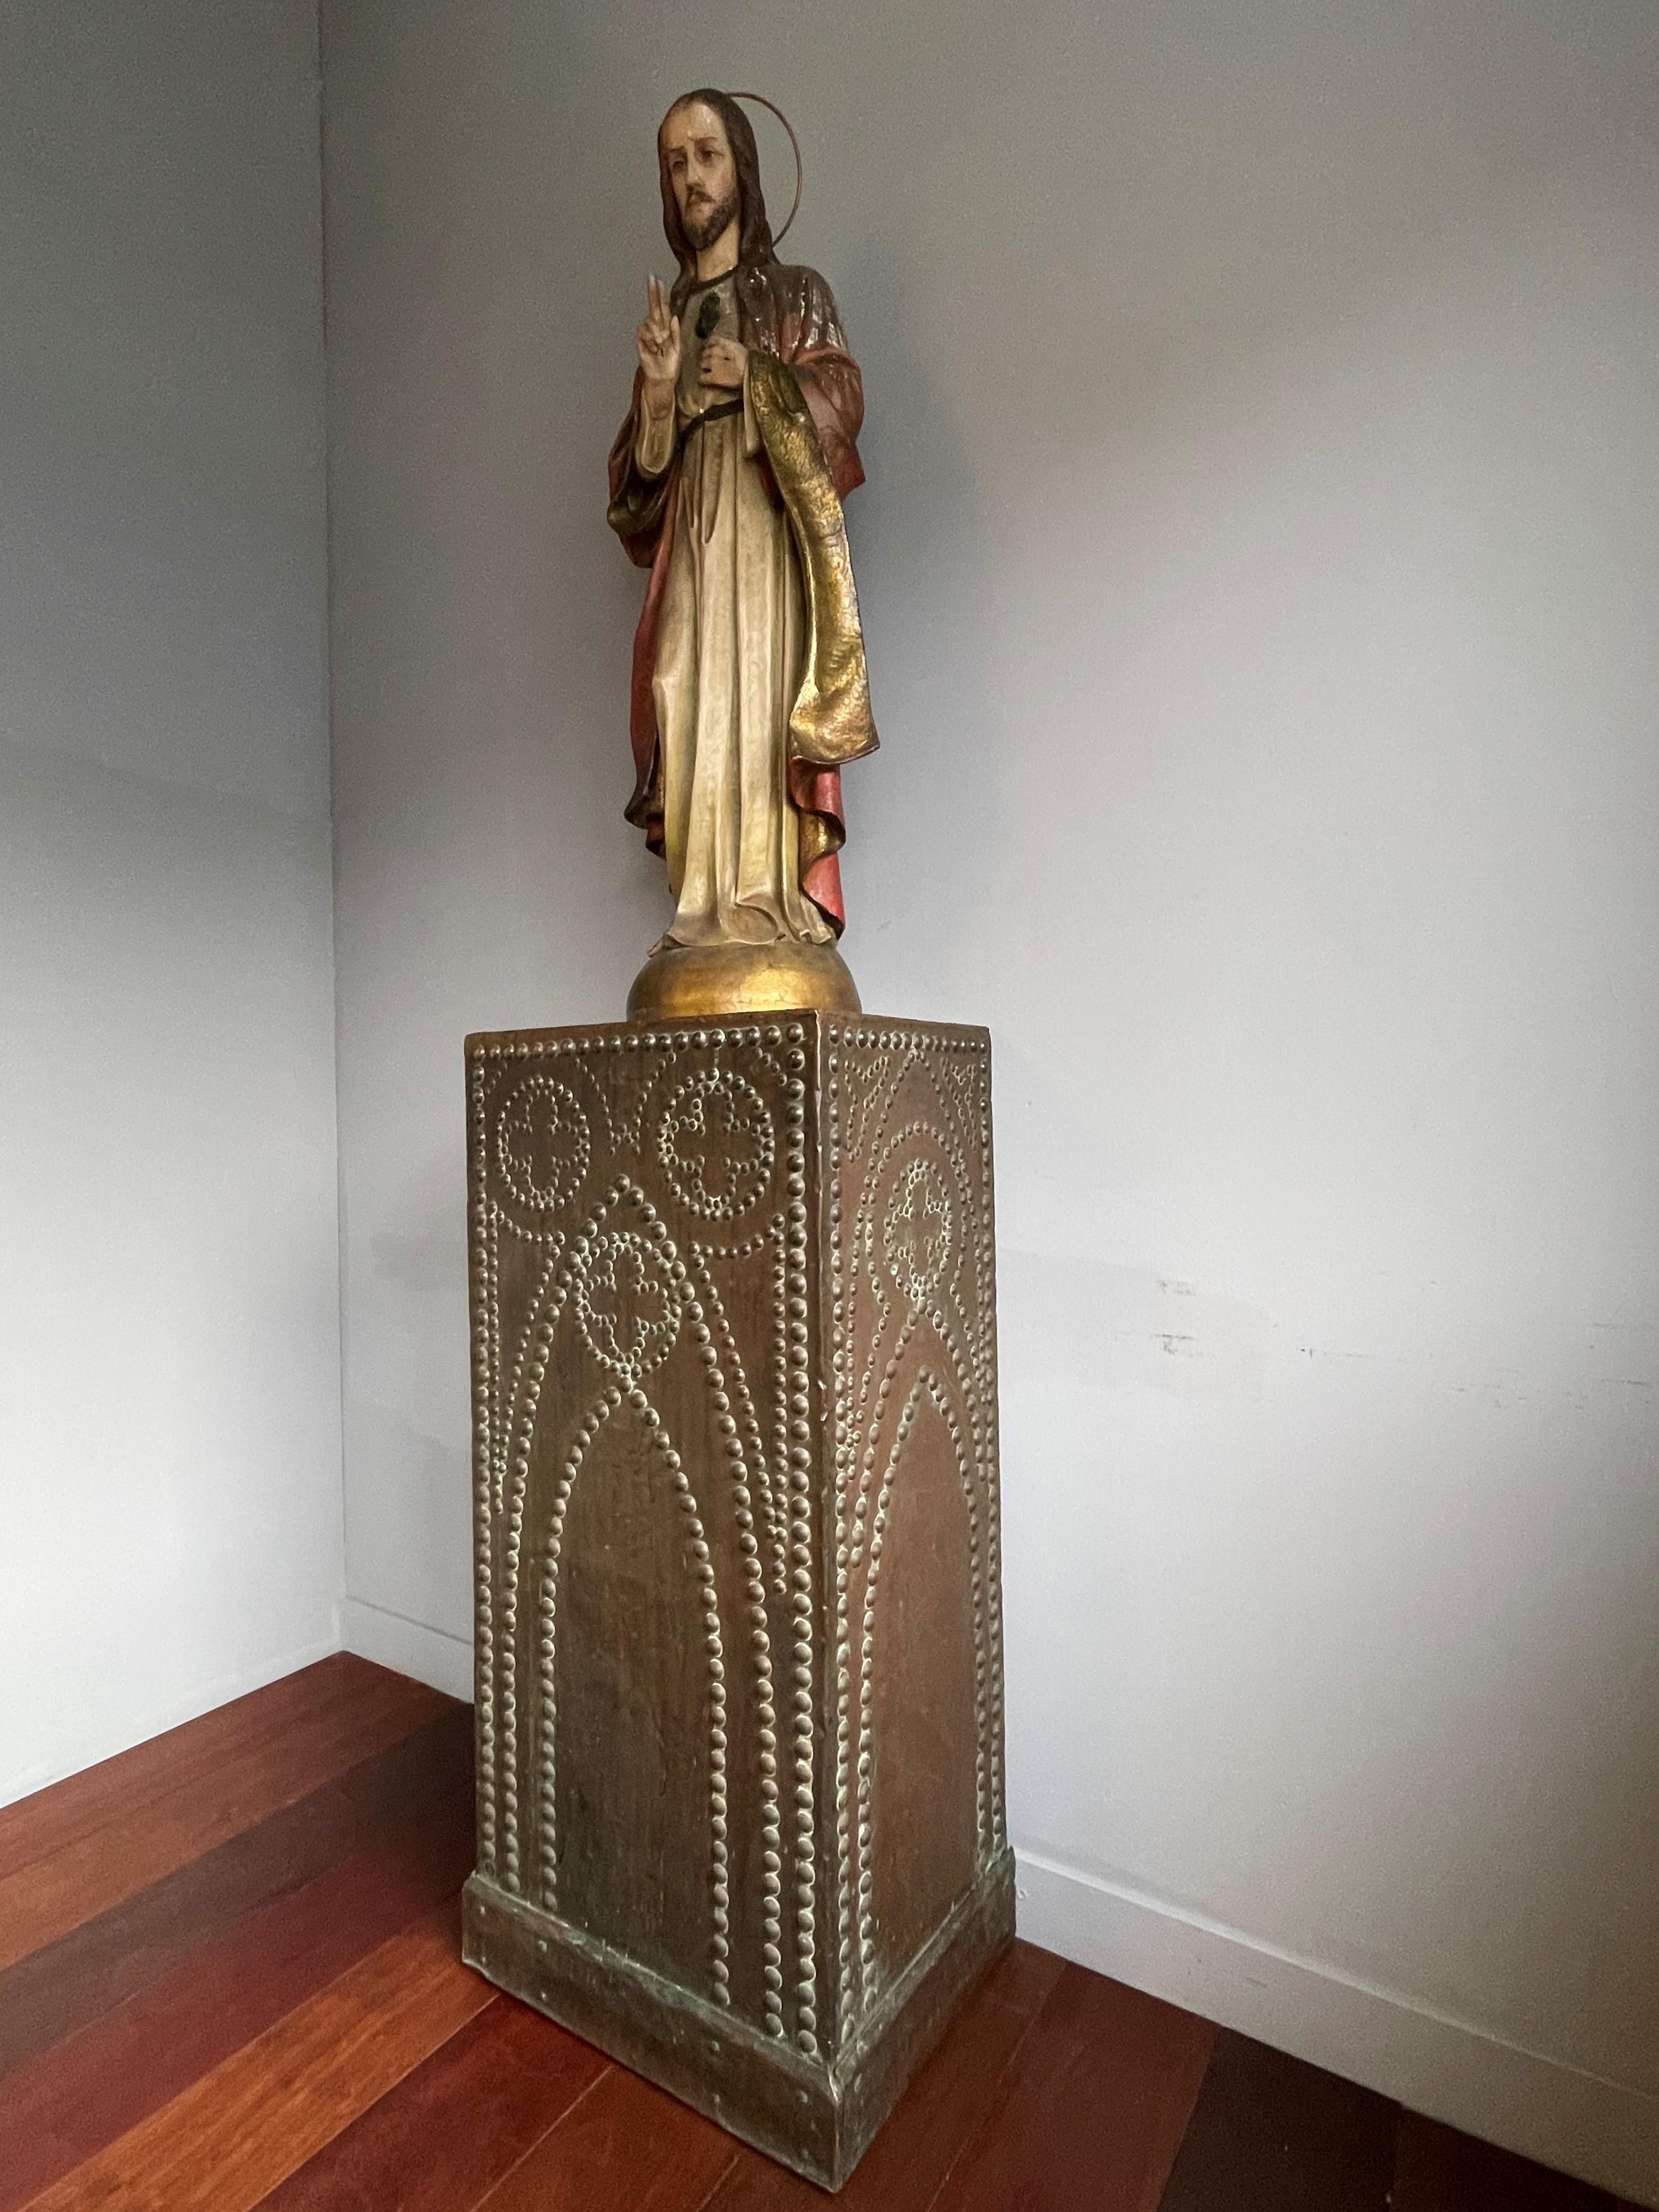 Unique Gothic pedestal with large brass rivots in church window-like patterns.

If only the rarest is good enough for you then this good size, architectural church pedestal could be the perfect addition to your collection/interior. Over the decades